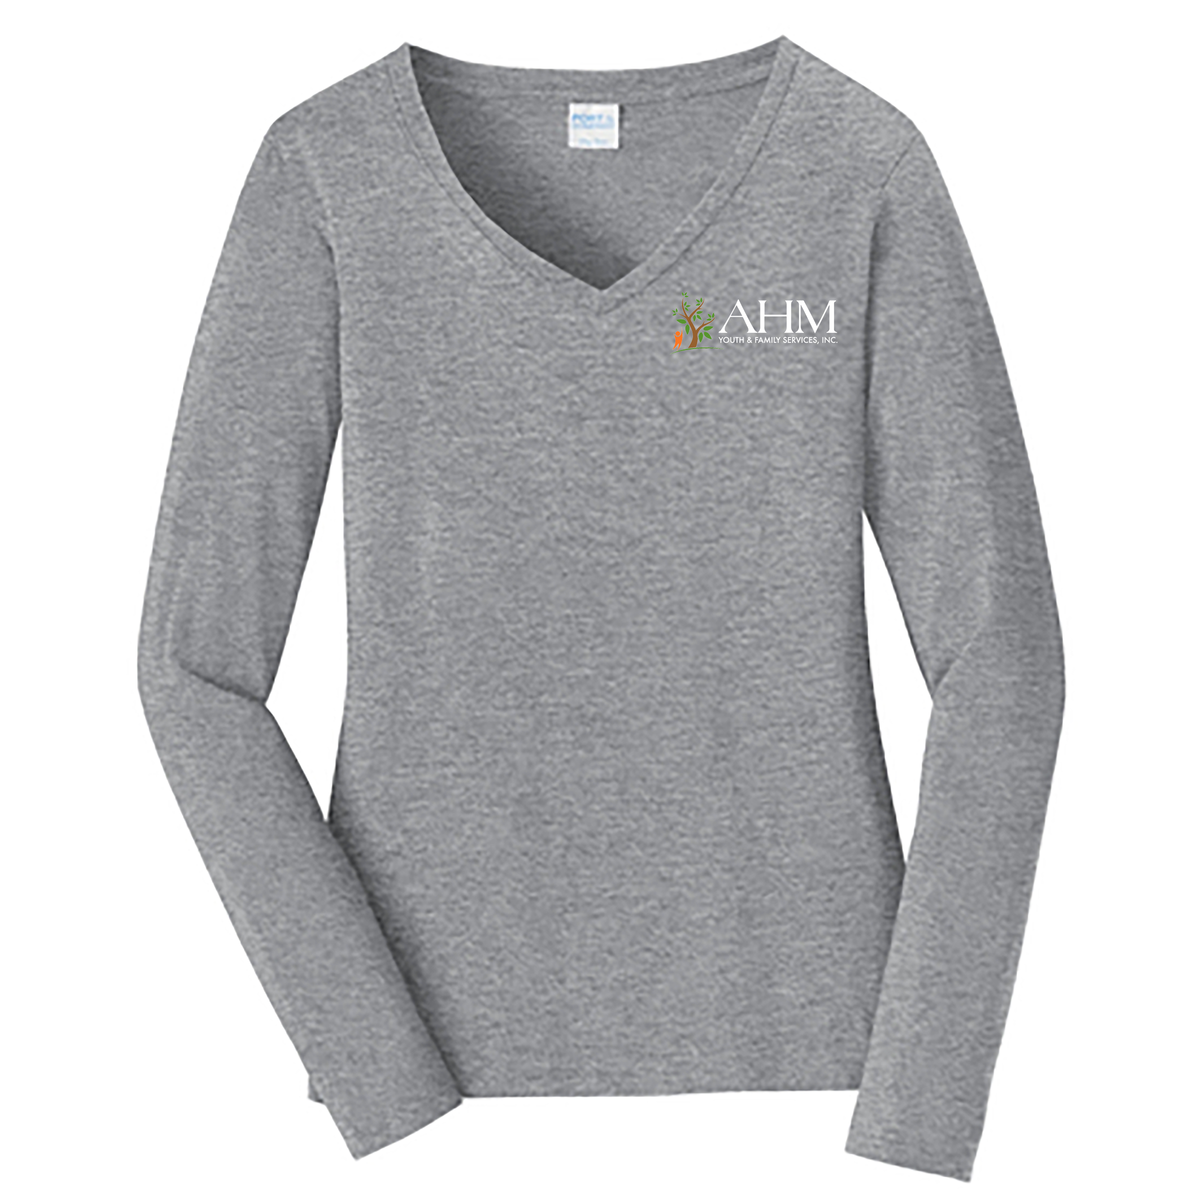 AHM Youth & Family Services Ladies Long Sleeve Fan Favorite V-Neck Tee